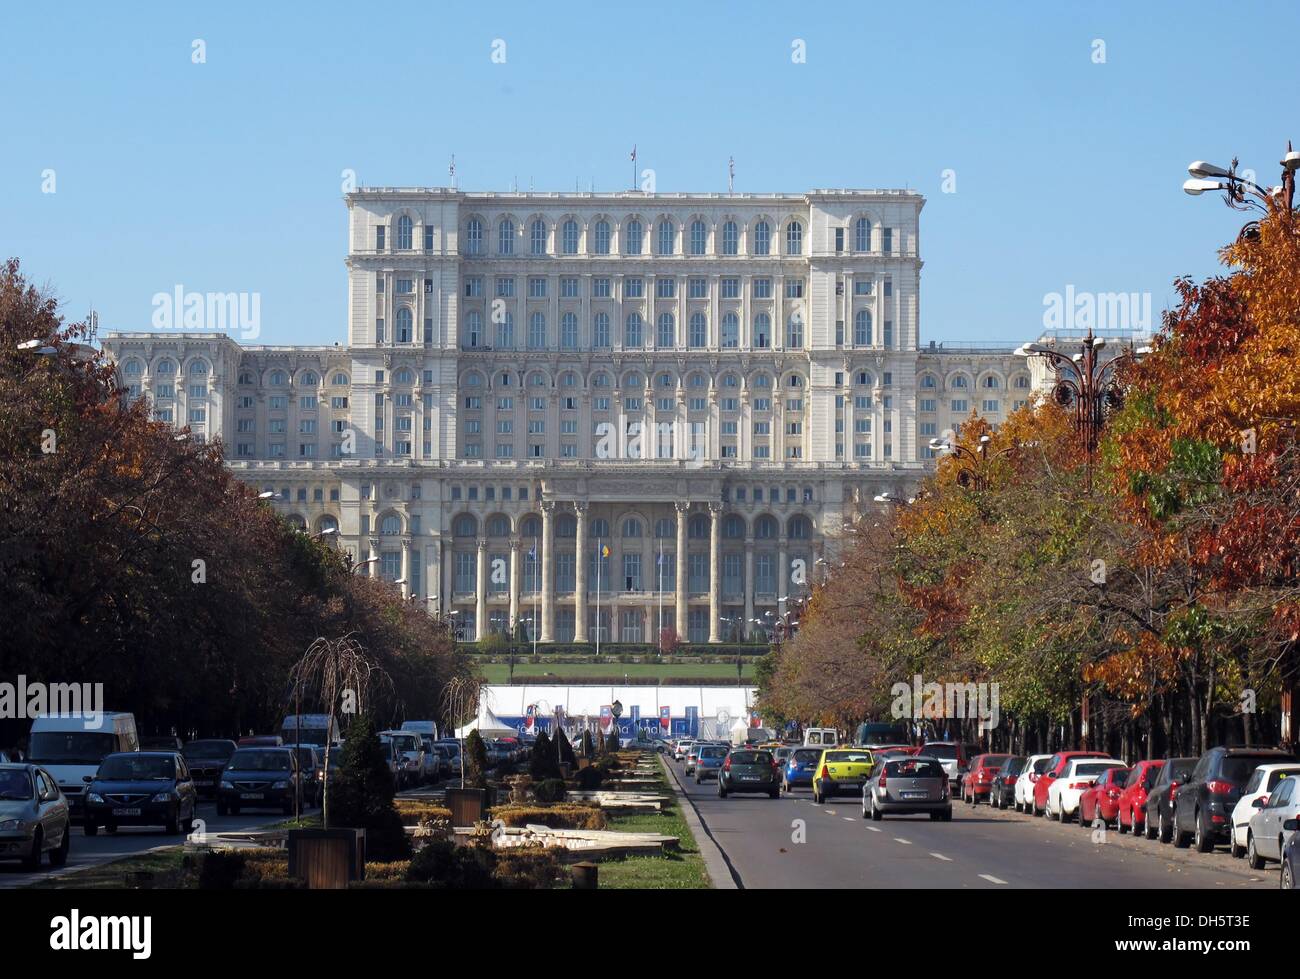 Bucharest, Romania. 23rd Oct, 2013. The palace of the parliament is the second largest building of the world with a floor area of 65.000 squaremeters and 5.100 rooms and stands in Bucharest, Romania, 23 October 2013. It was raised between 1983 and 1989 of the architect Anca Petrescu on behalf of the president Nicolae Ceausescu. Photo: Jens Kalaene/dpa/Alamy Live News Stock Photo